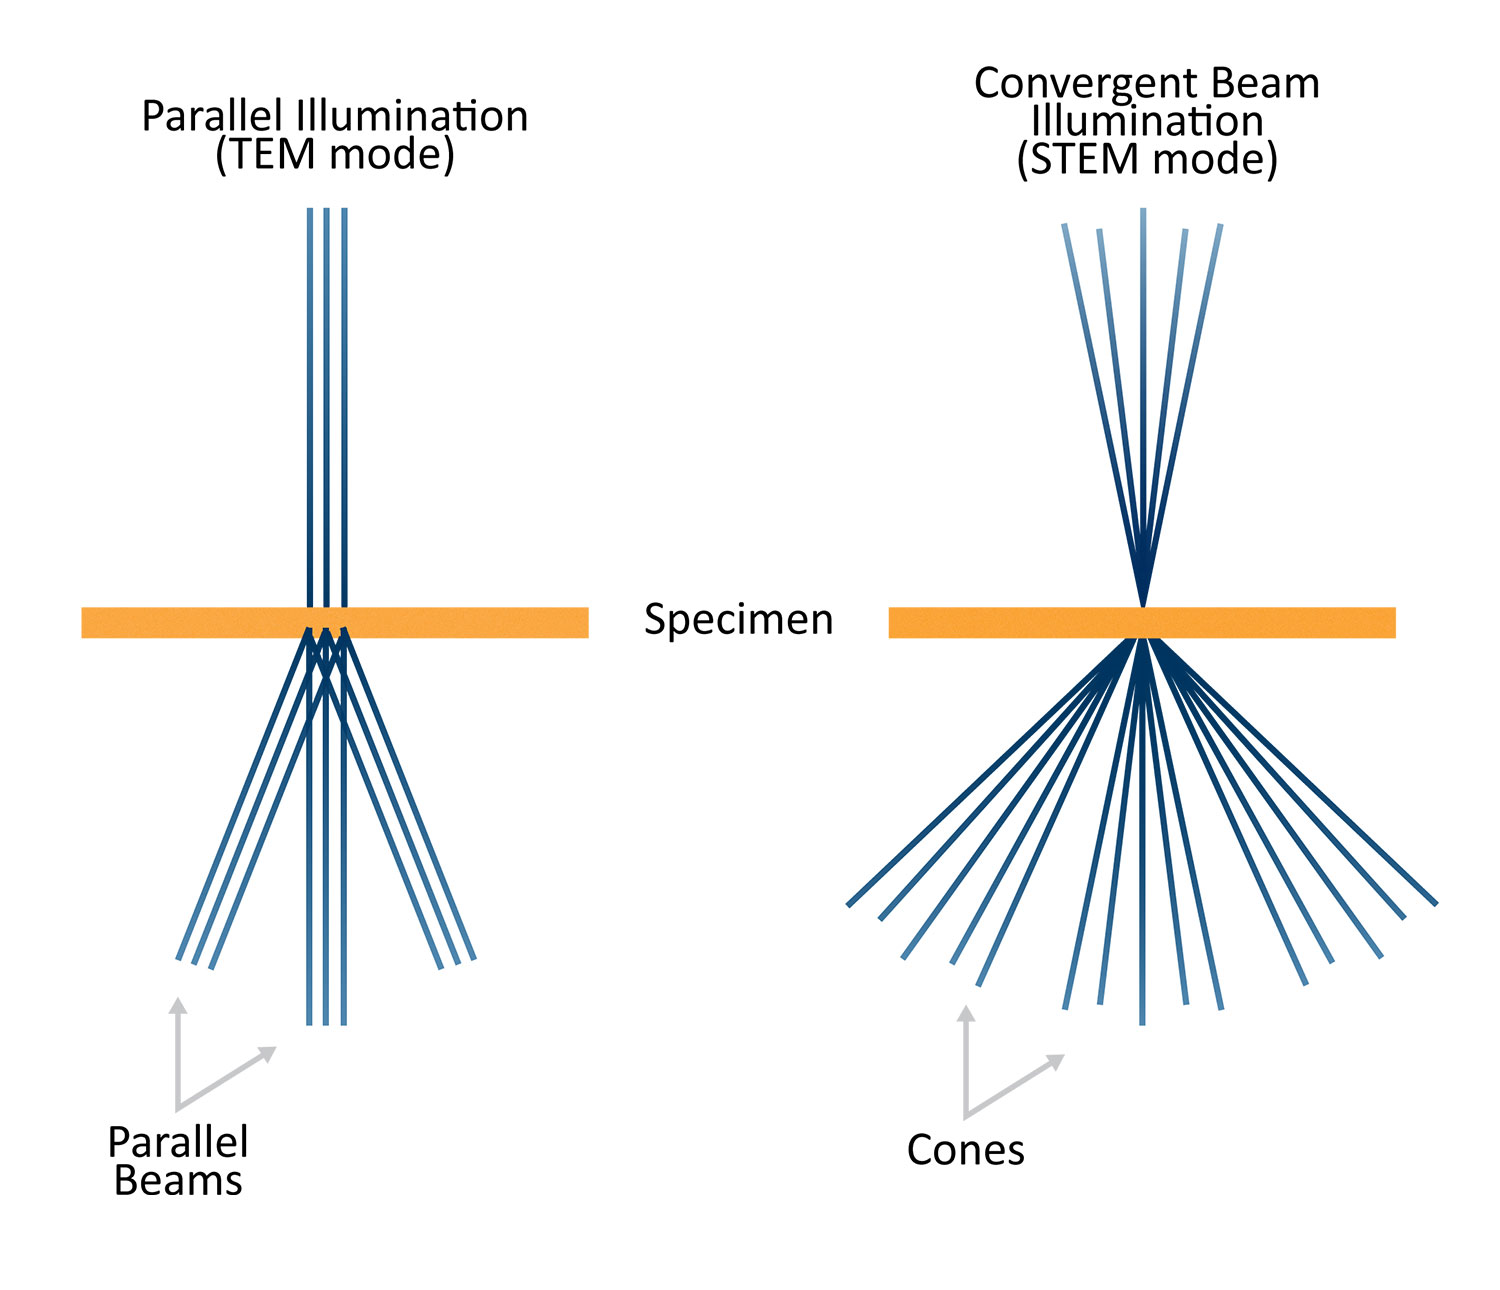 Difference between diffracted beams formed with parallel (left) and convergent beam (right) illumination.